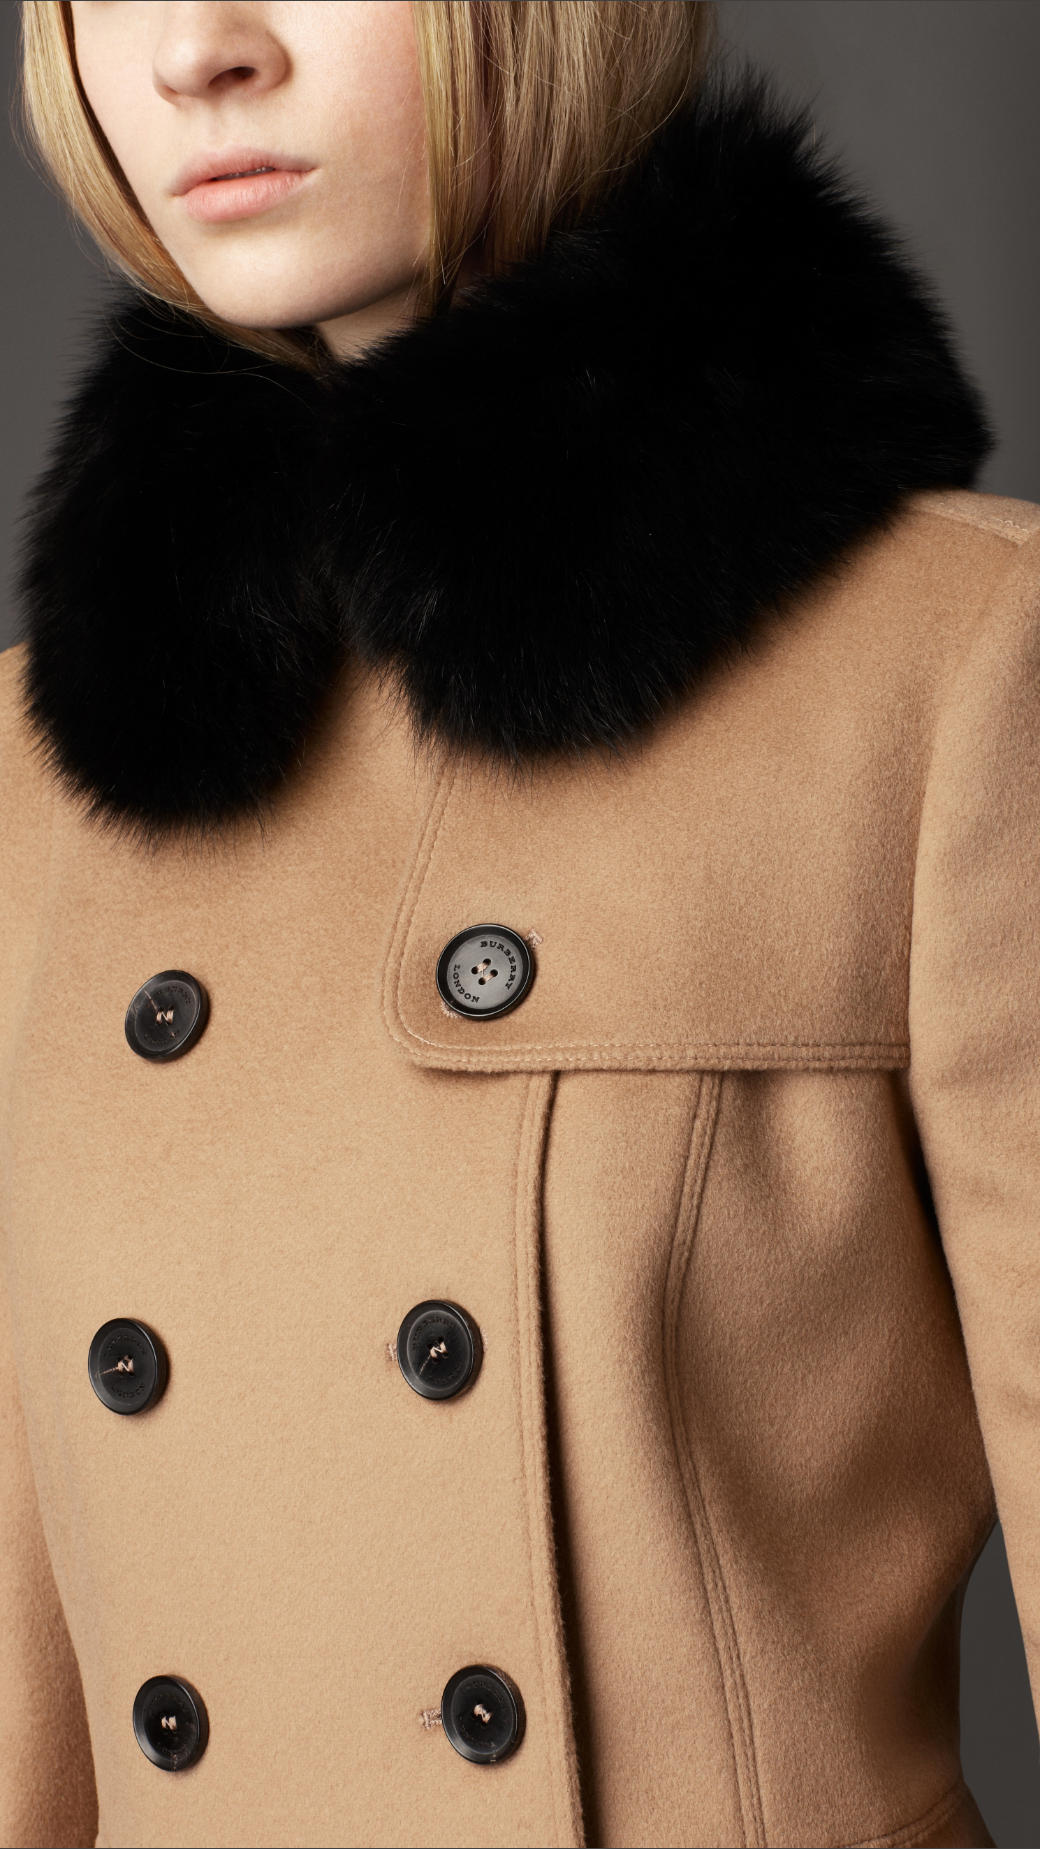 Burberry Midlength Wool Cashmere Fur Collar Trench Coat in Natural | Lyst